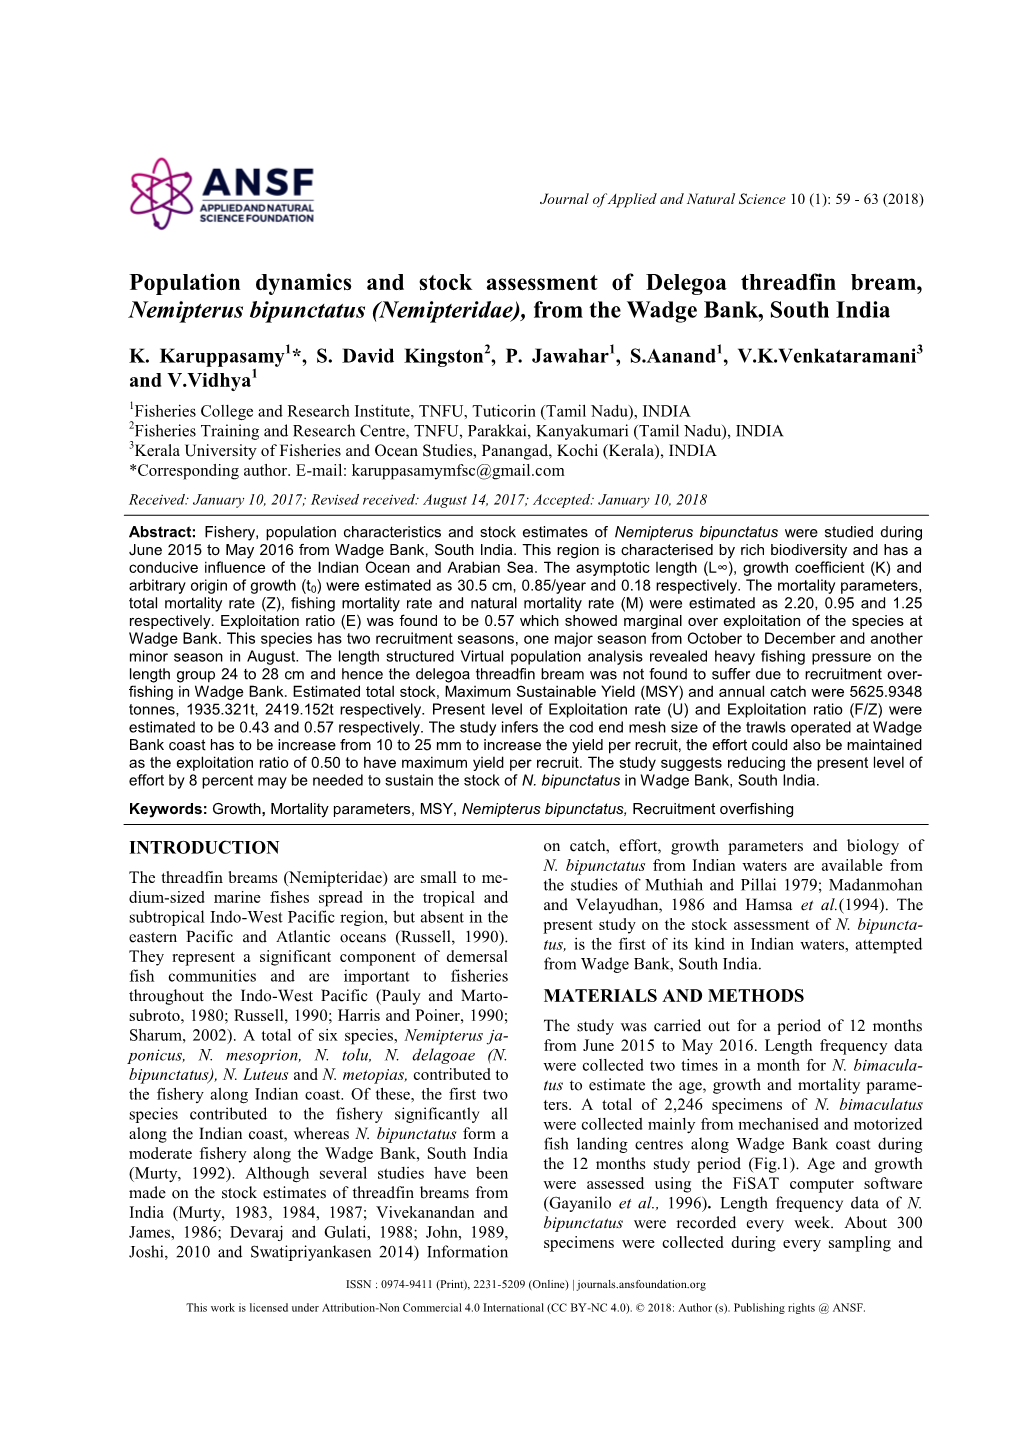 Population Dynamics and Stock Assessment of Delegoa Threadfin Bream, Nemipterus Bipunctatus (Nemipteridae), from the Wadge Bank, South India